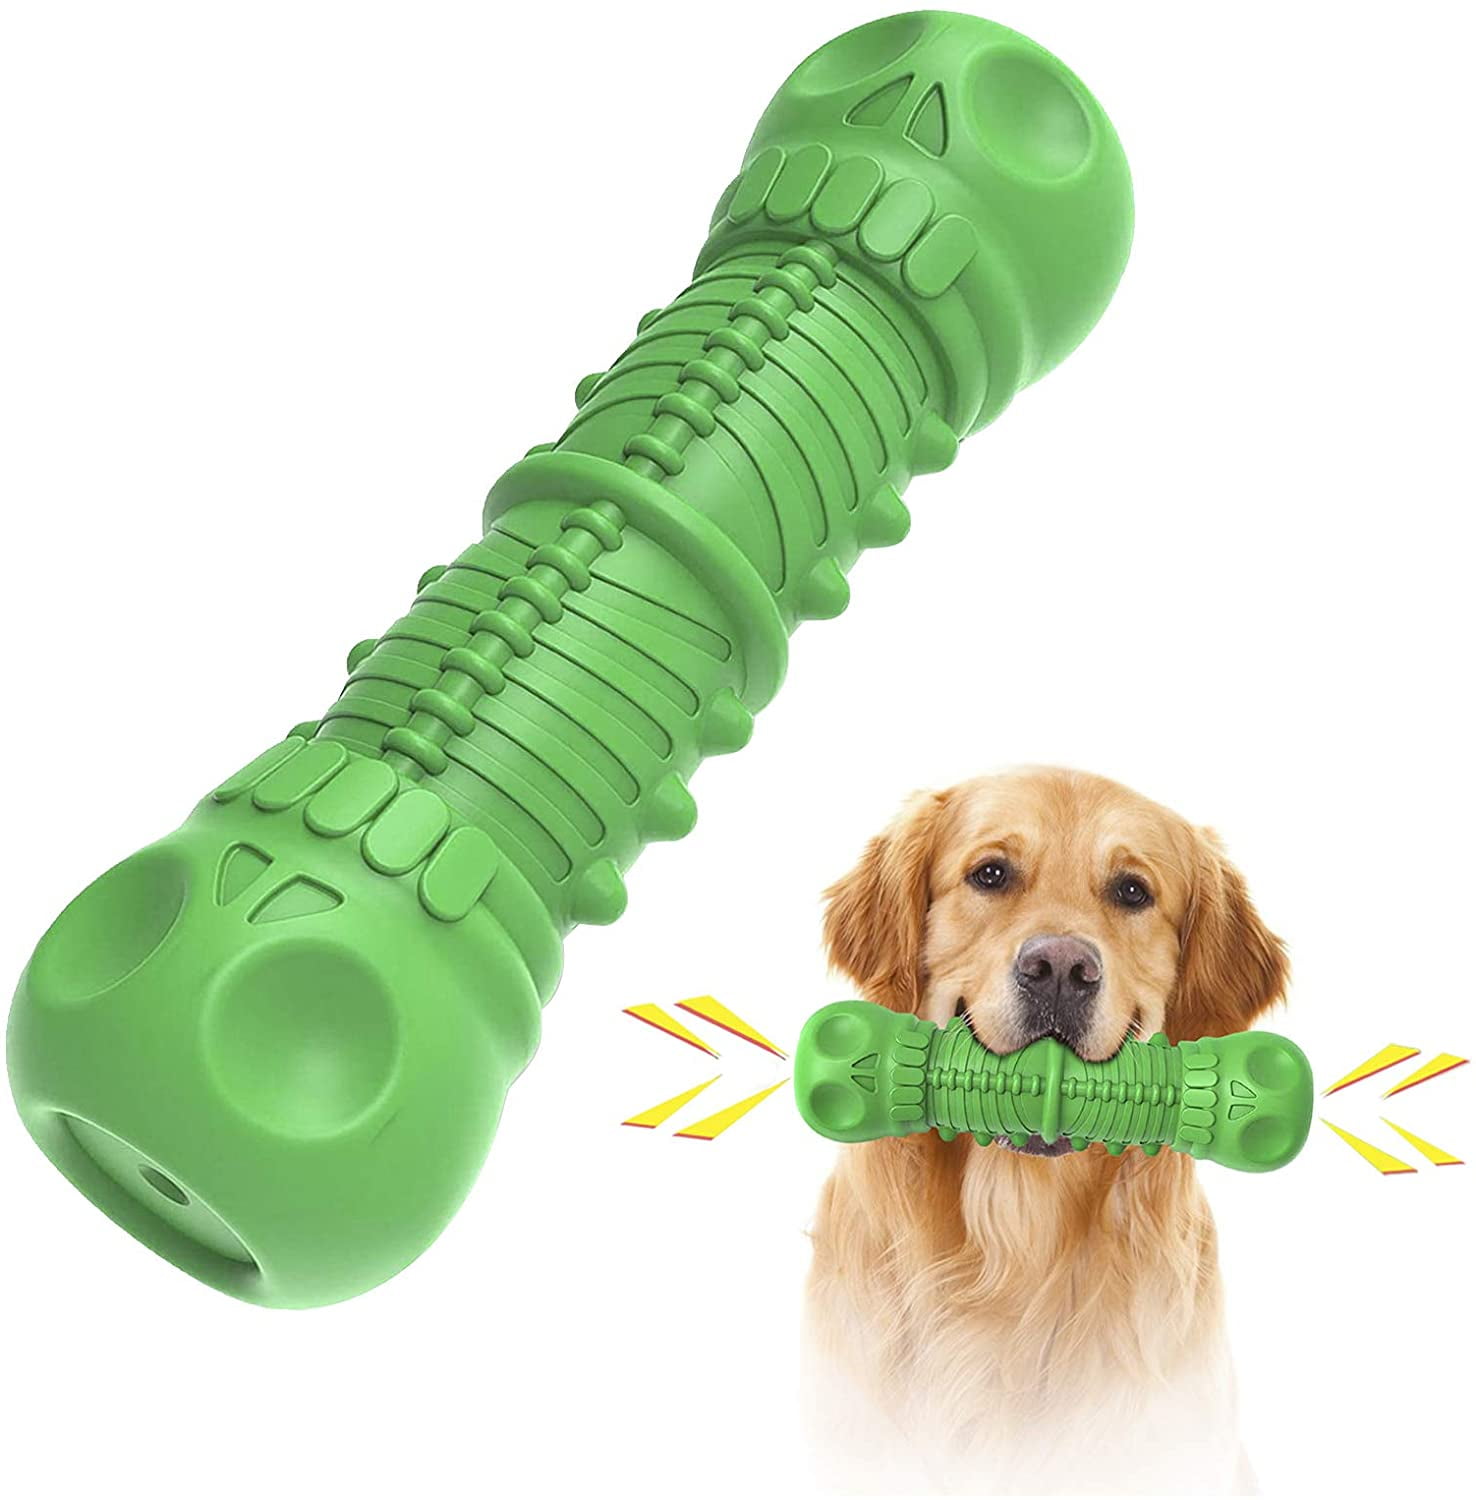 Nearly Indestructible Tough Durable Dog Chewing Toys Dog Chew Toys for Aggressive Chewers Natural Rubber Teeth Cleaning Dog Bones Toys for Medium or Large Breed Dog Squeaky Toys 